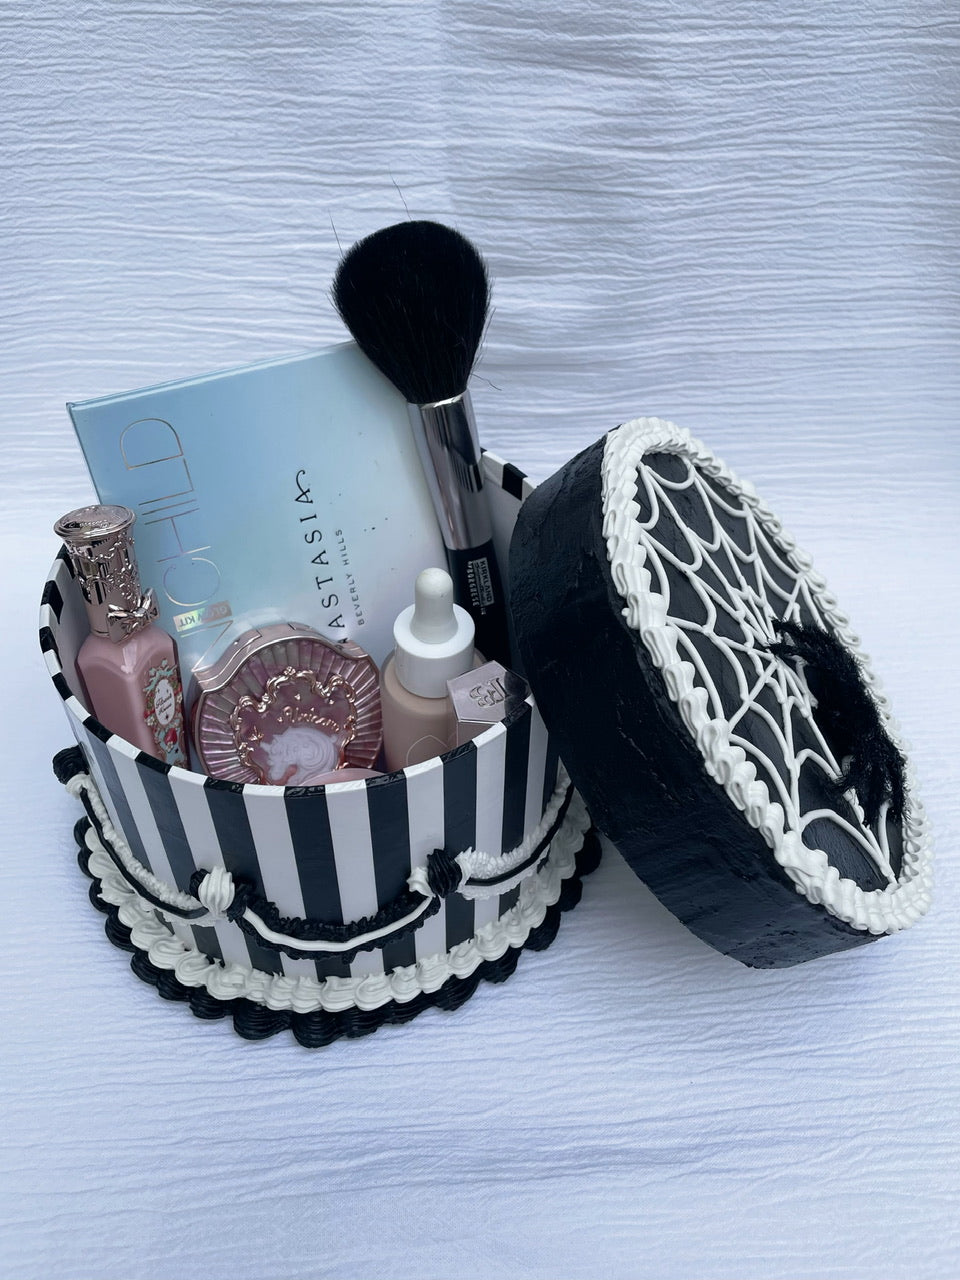 an opened black and white cardboard box decorated to look like a cake and holding various makeup items